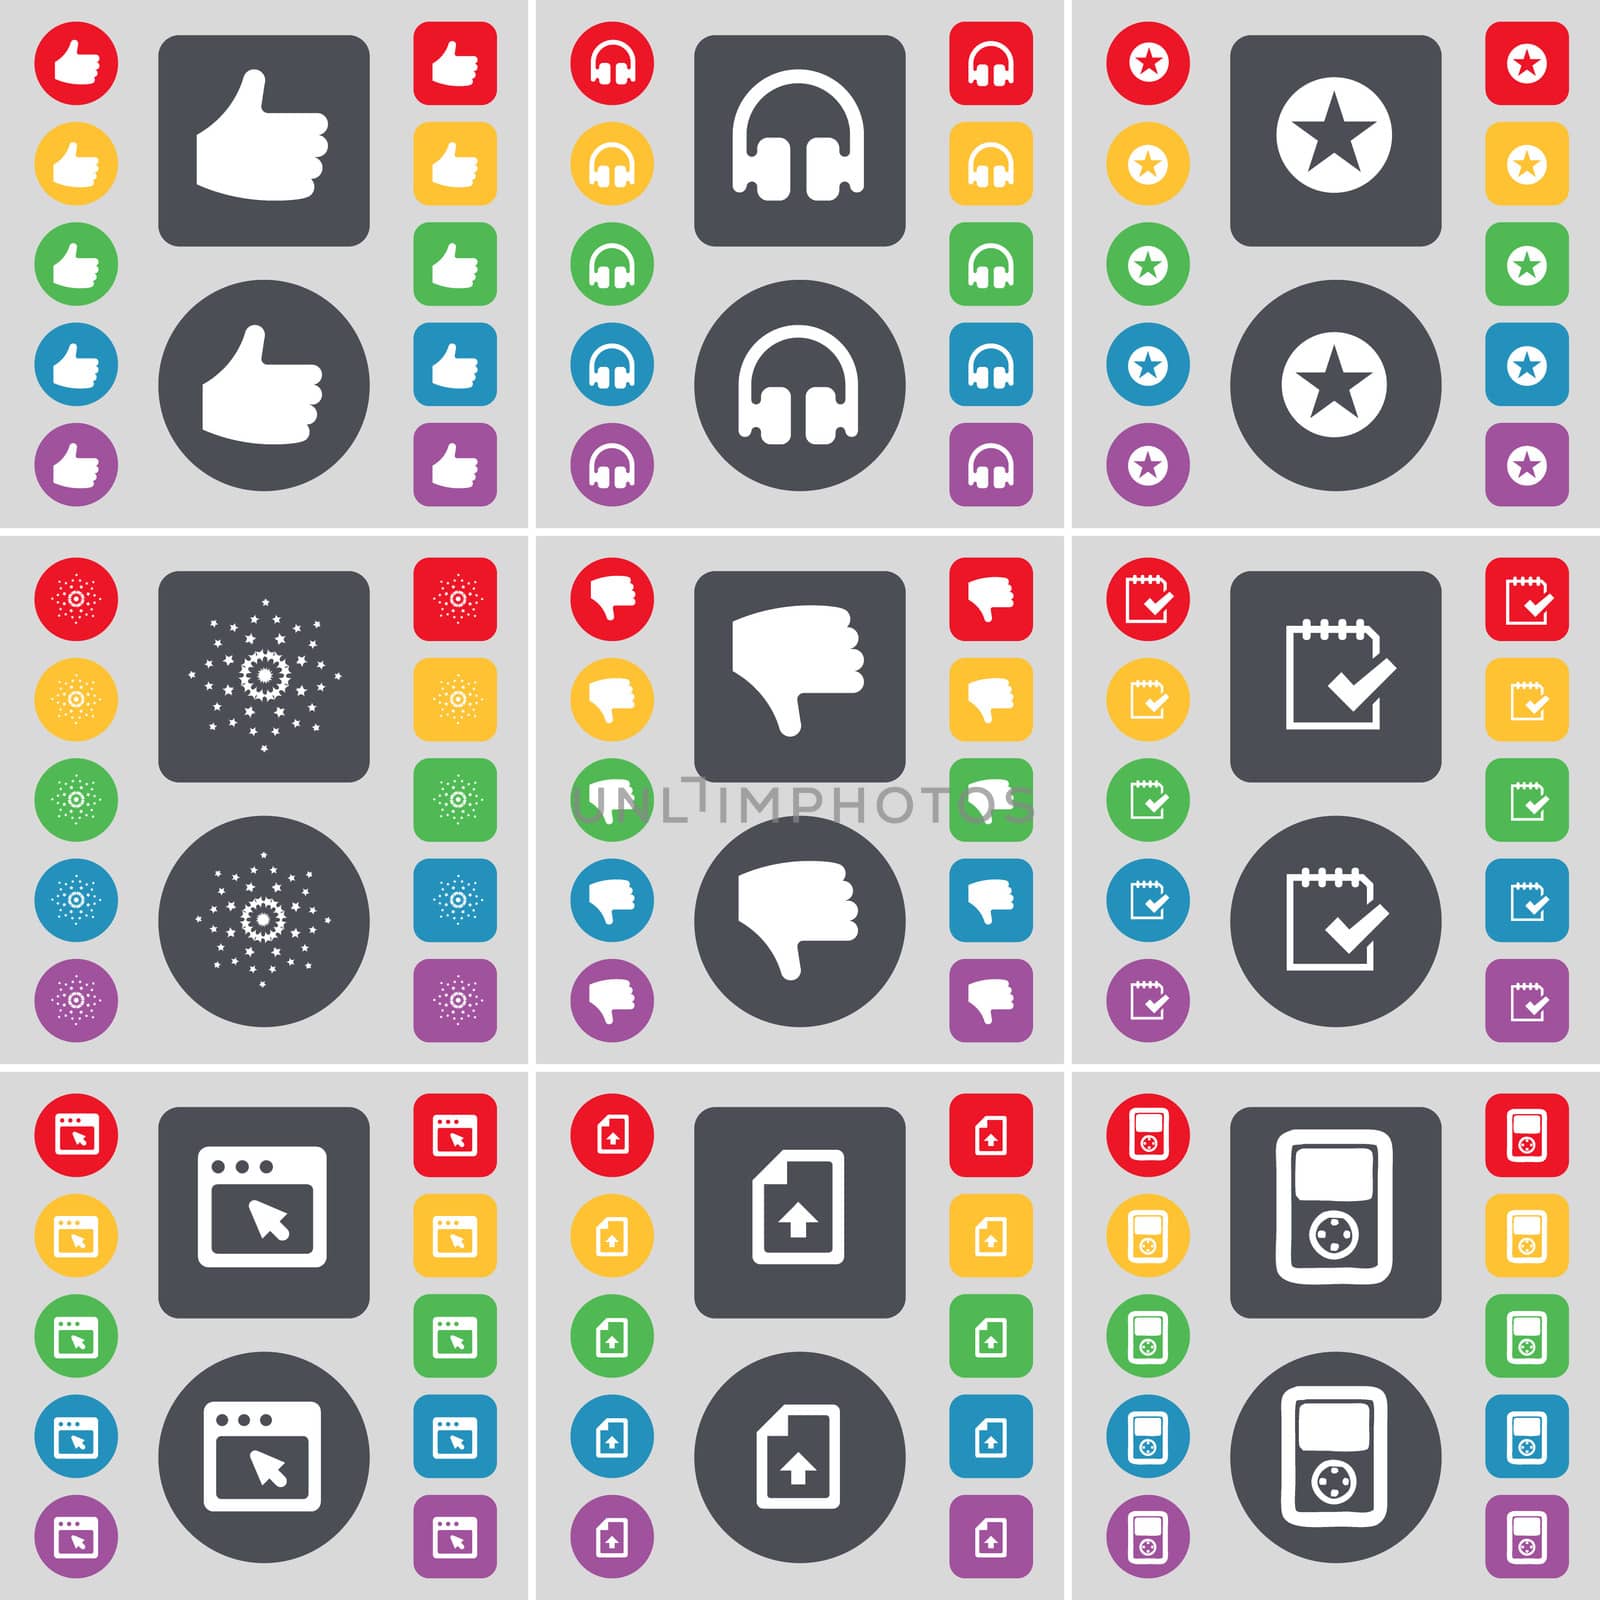 Like, Headphones, Star, Dislike, Survey, Window, Upload file, Player icon symbol. A large set of flat, colored buttons for your design.  by serhii_lohvyniuk